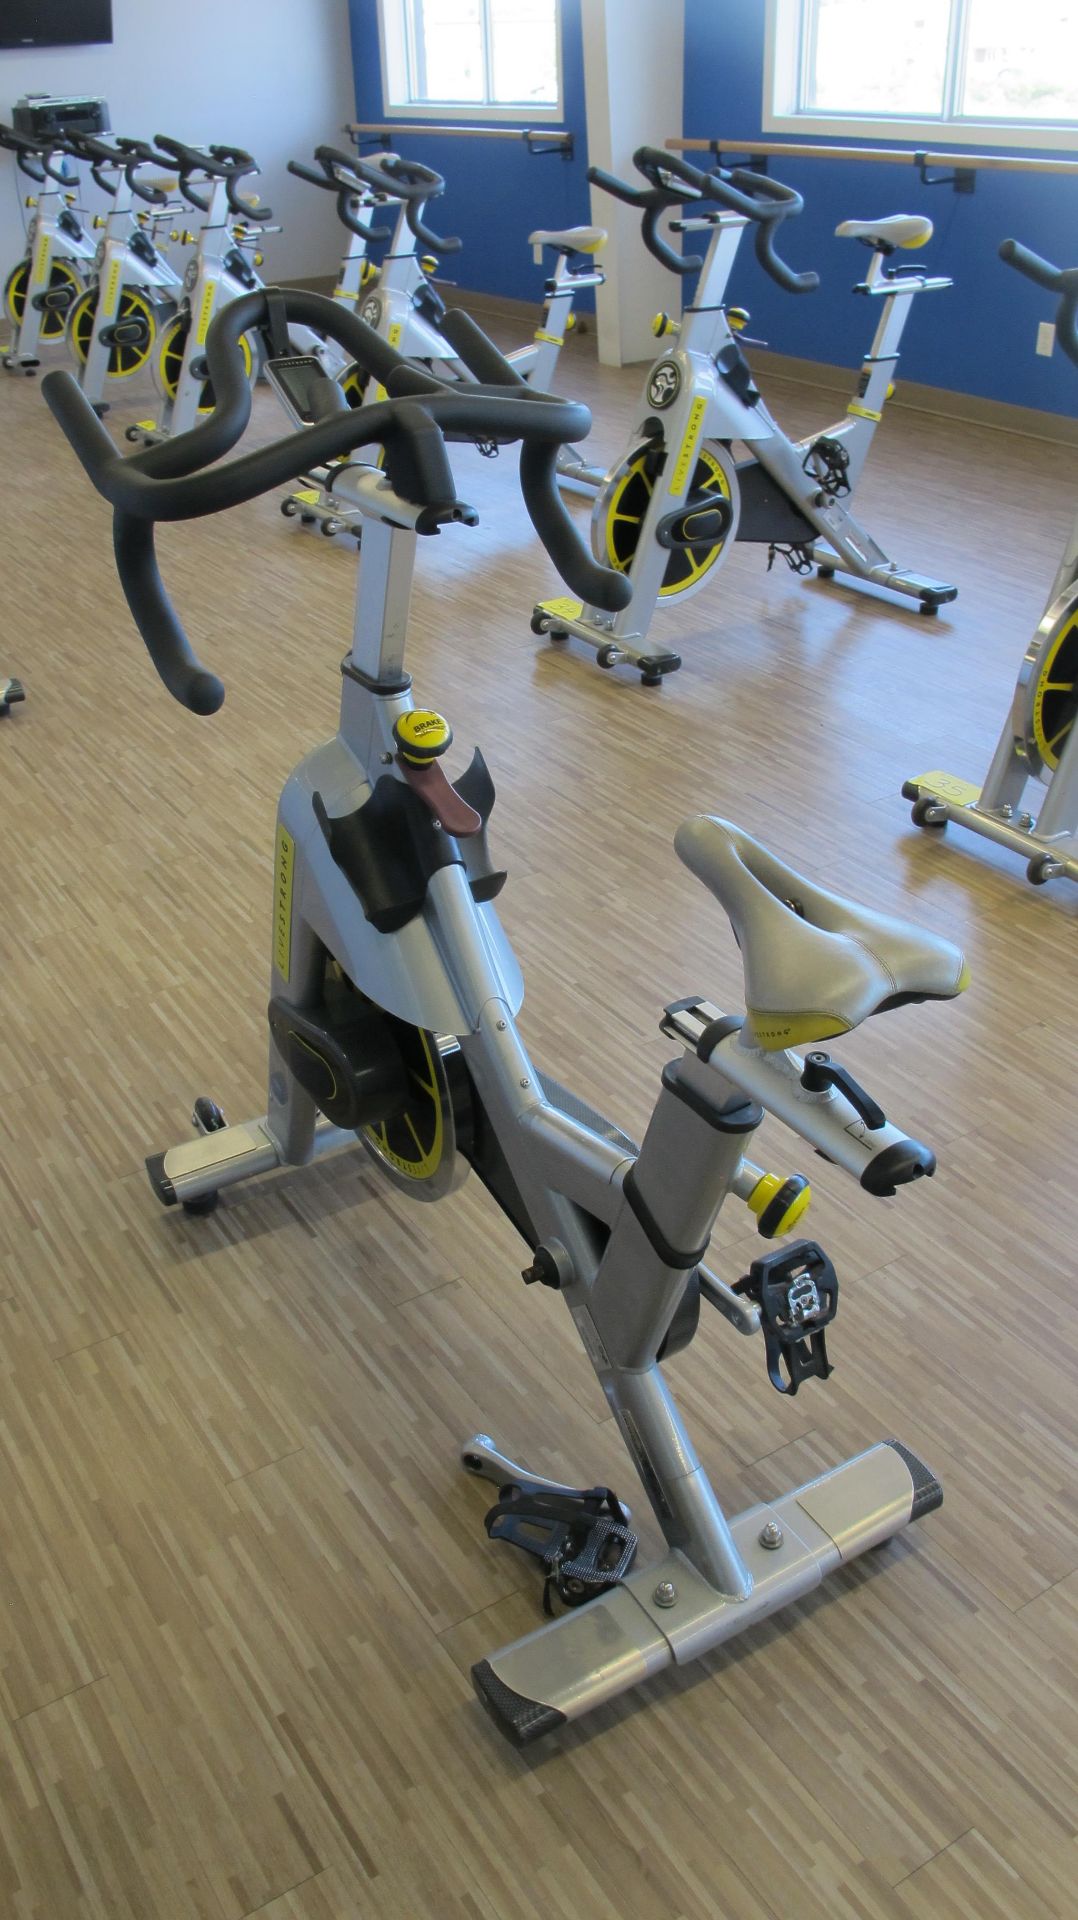 LIVESTRONG LS S-Series Class S Stationary Spin Bike, 'AS-IS', S/N: LASB0008034-111 - Image 6 of 10